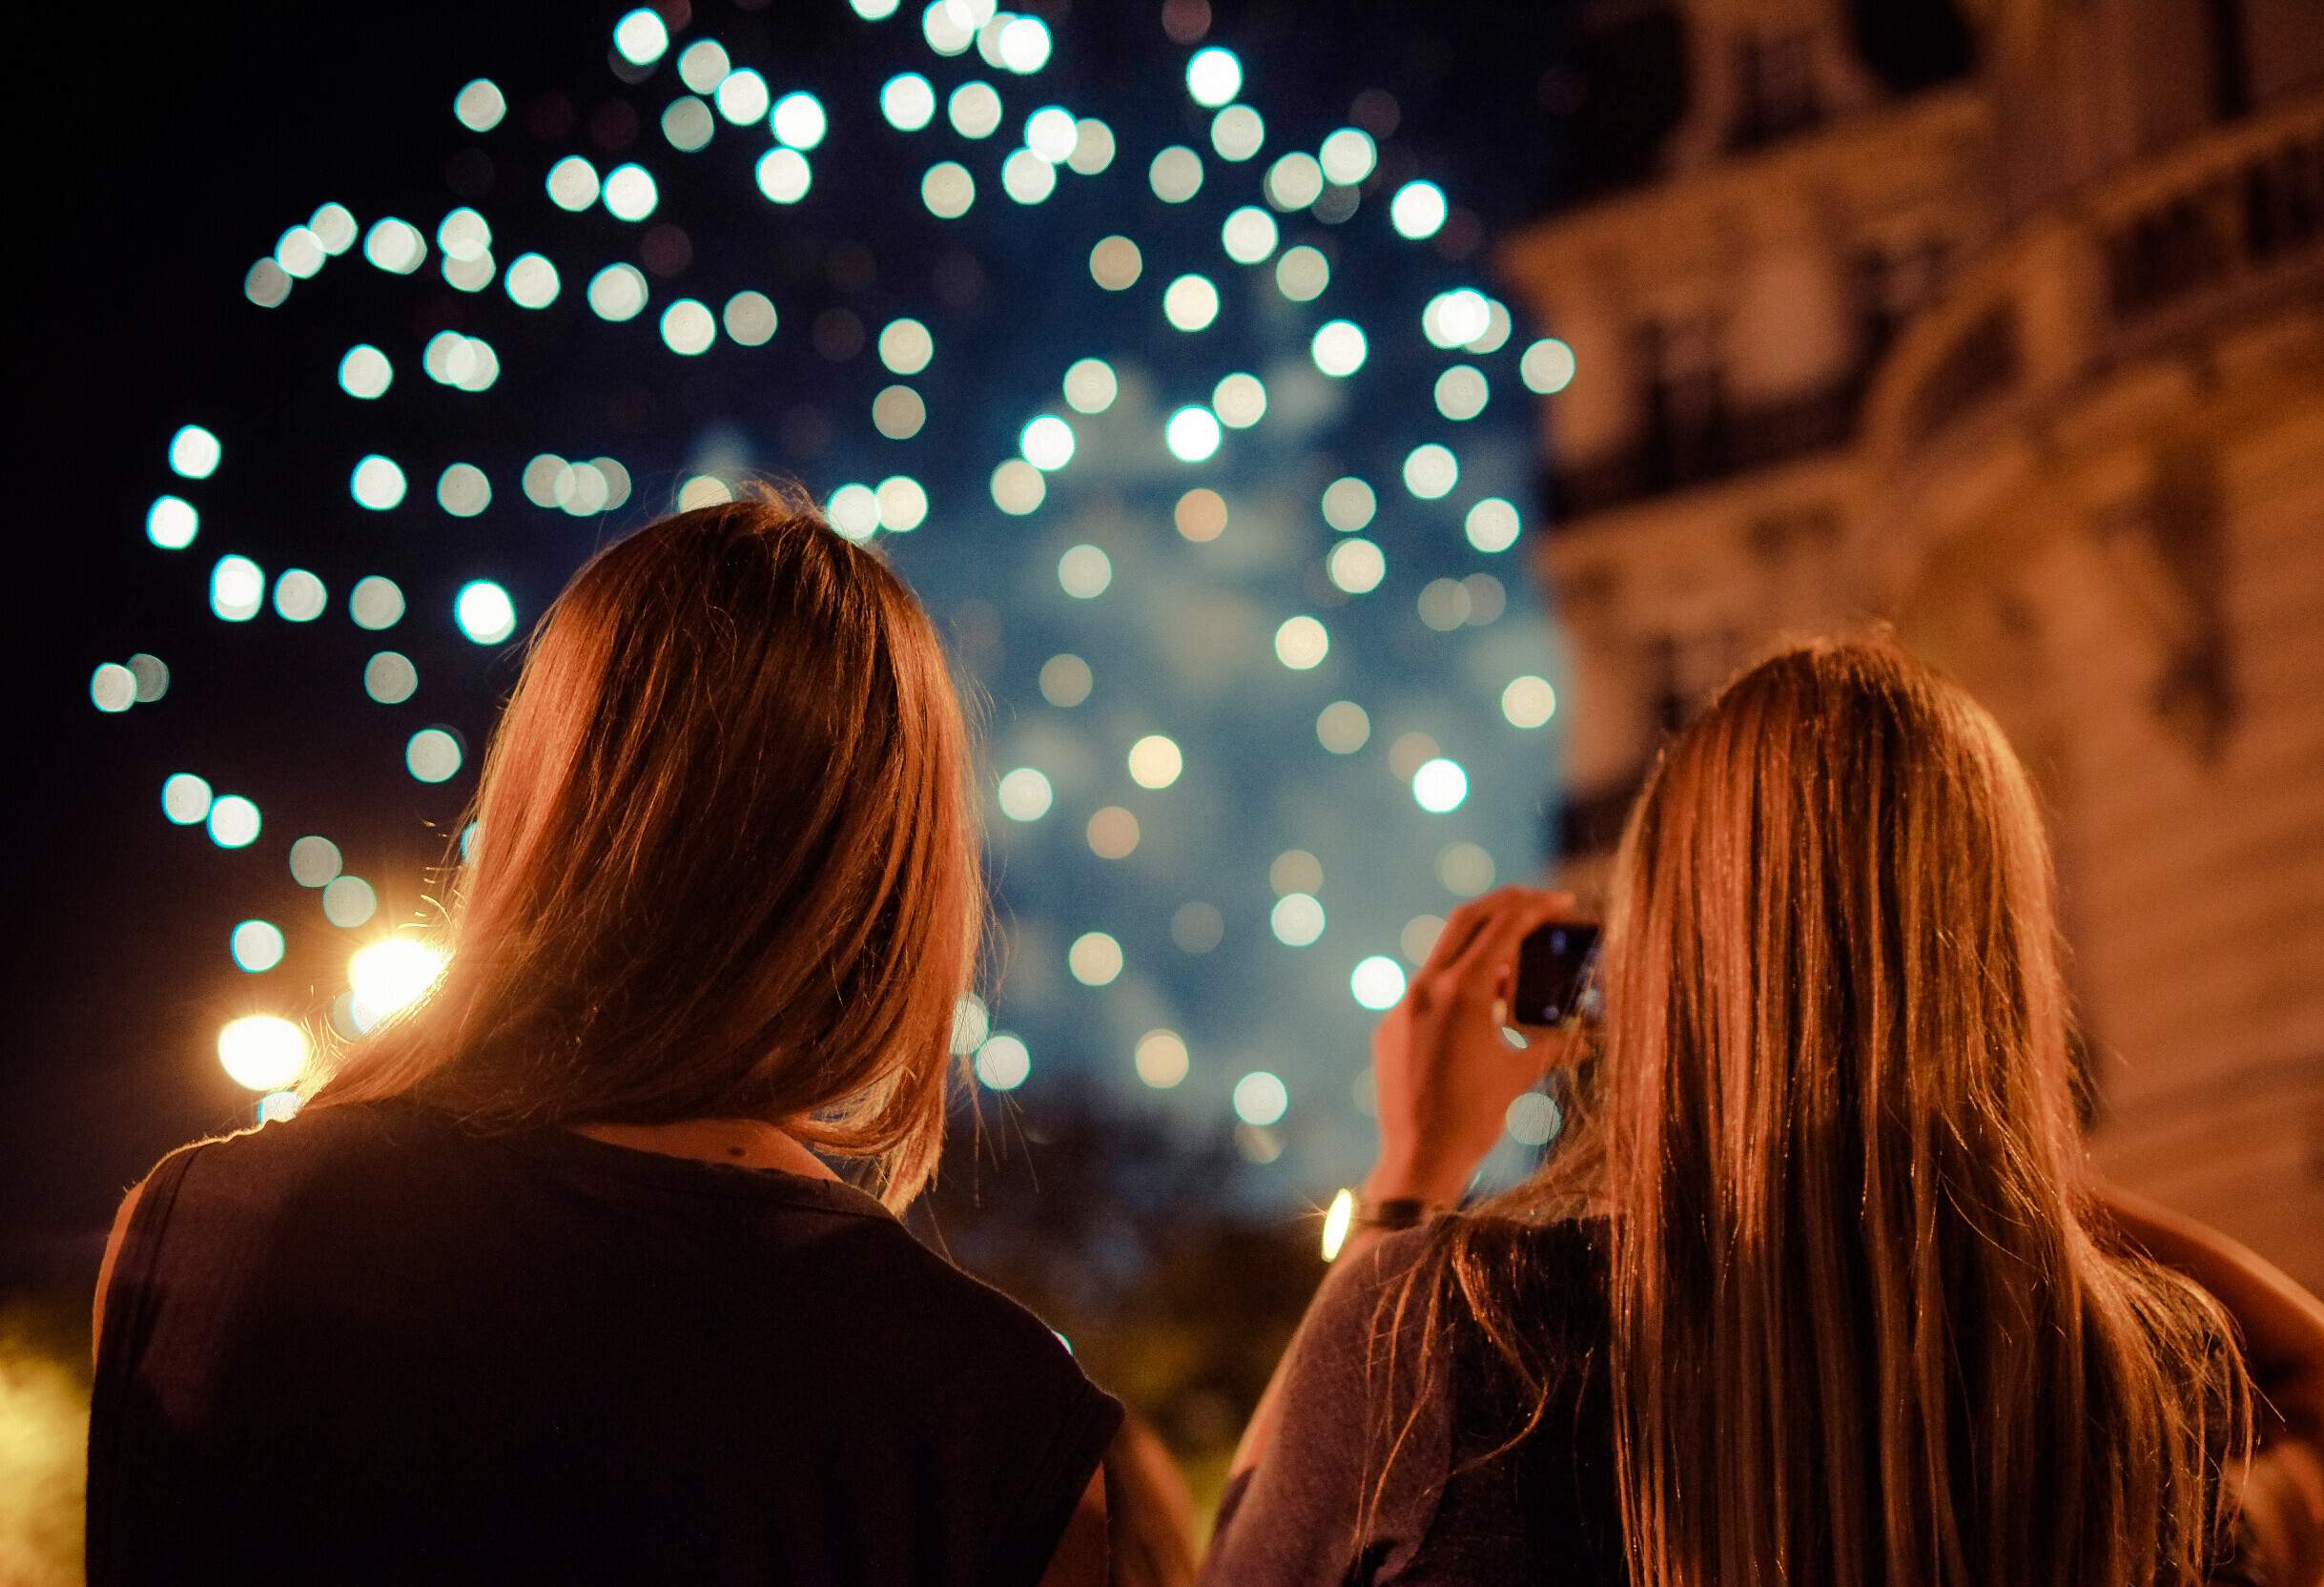 A person stares up at the sky full of fireworks while another snaps a photo.